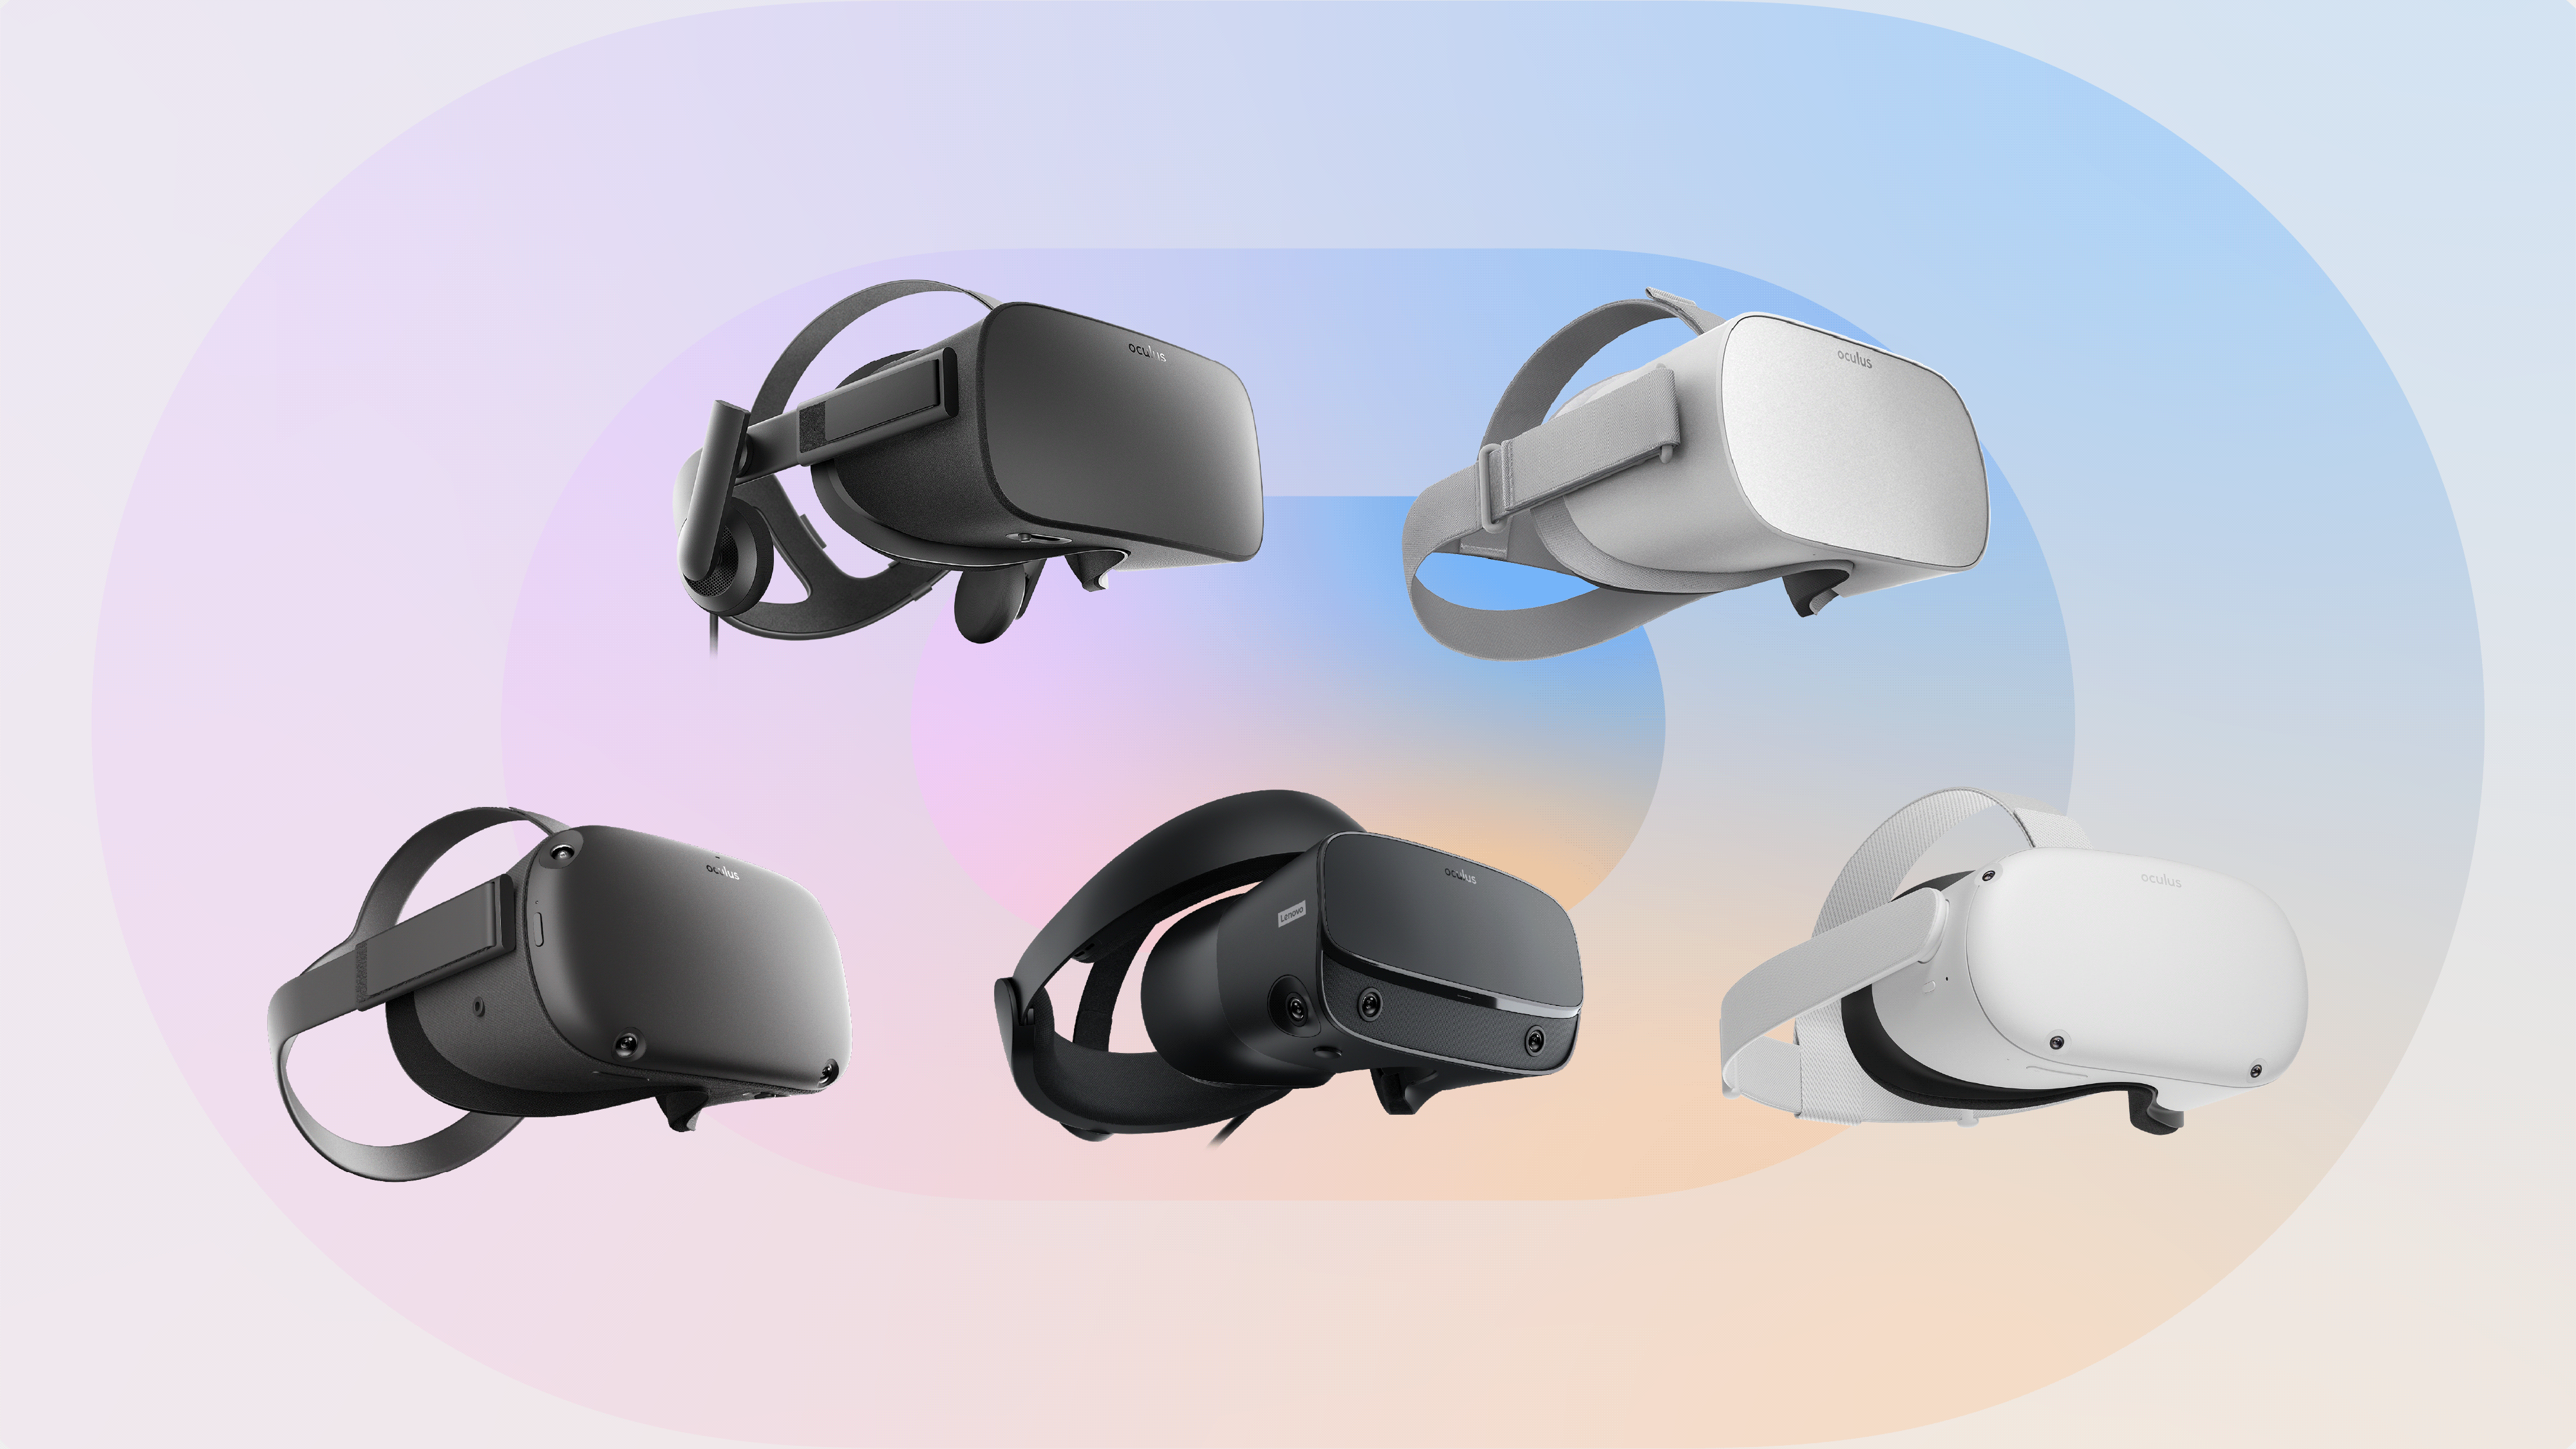  The image shows the evolution of VR headsets from 2016 to 2023, with the Oculus Rift, Oculus Go, Oculus Quest, Oculus Quest 2, and the Meta Quest Pro.